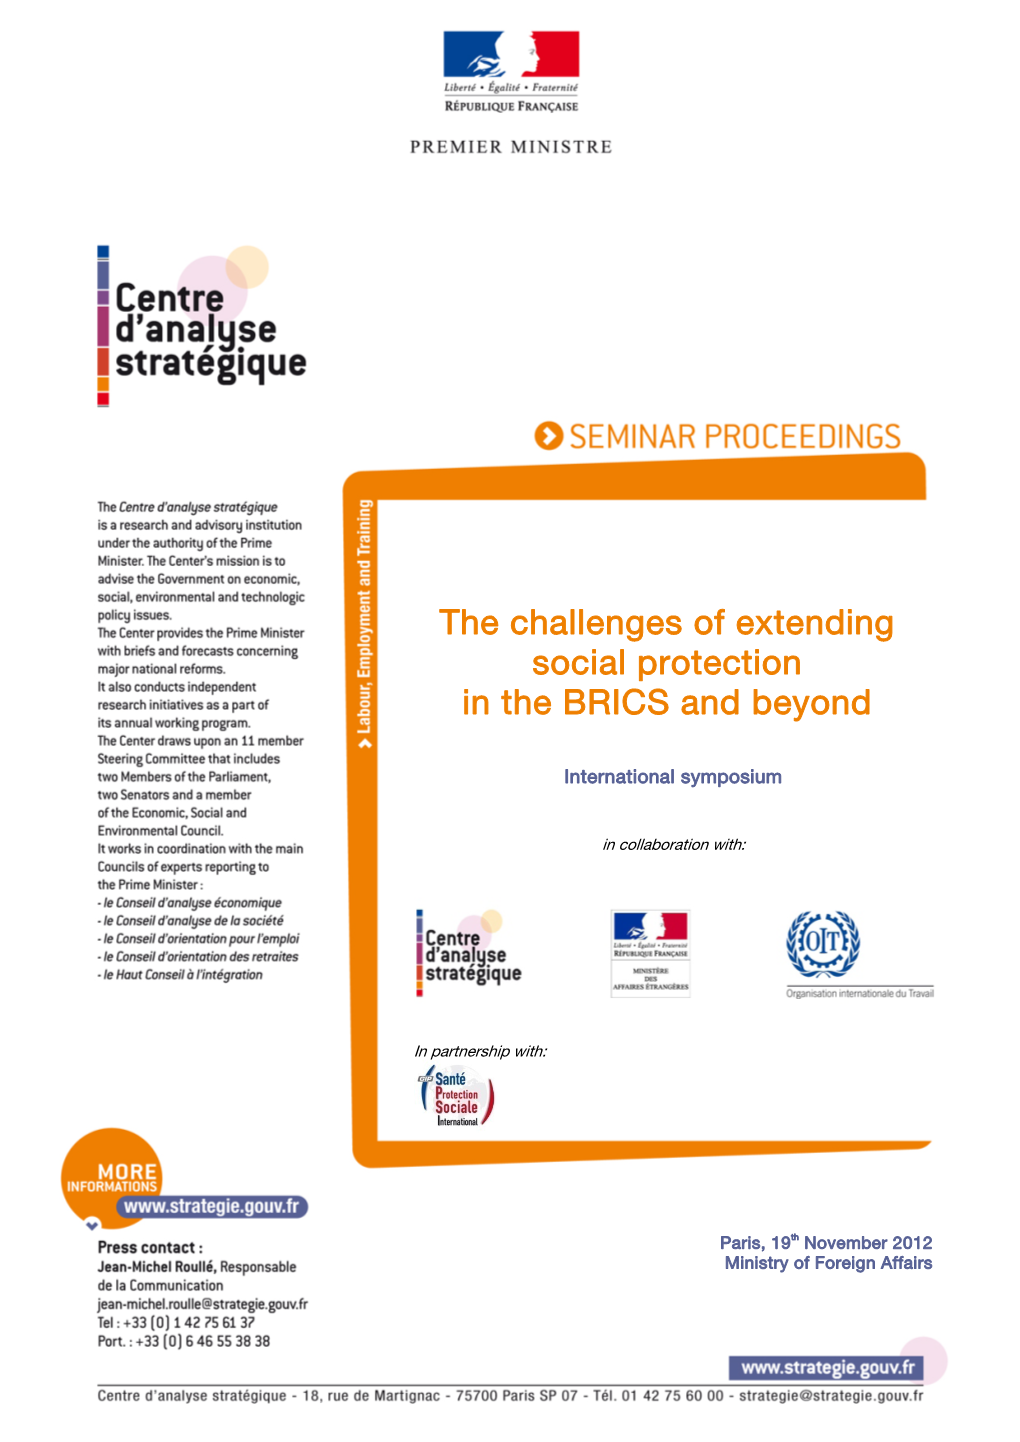 The Challenges of Extending Social Protection in the BRICS and Beyond